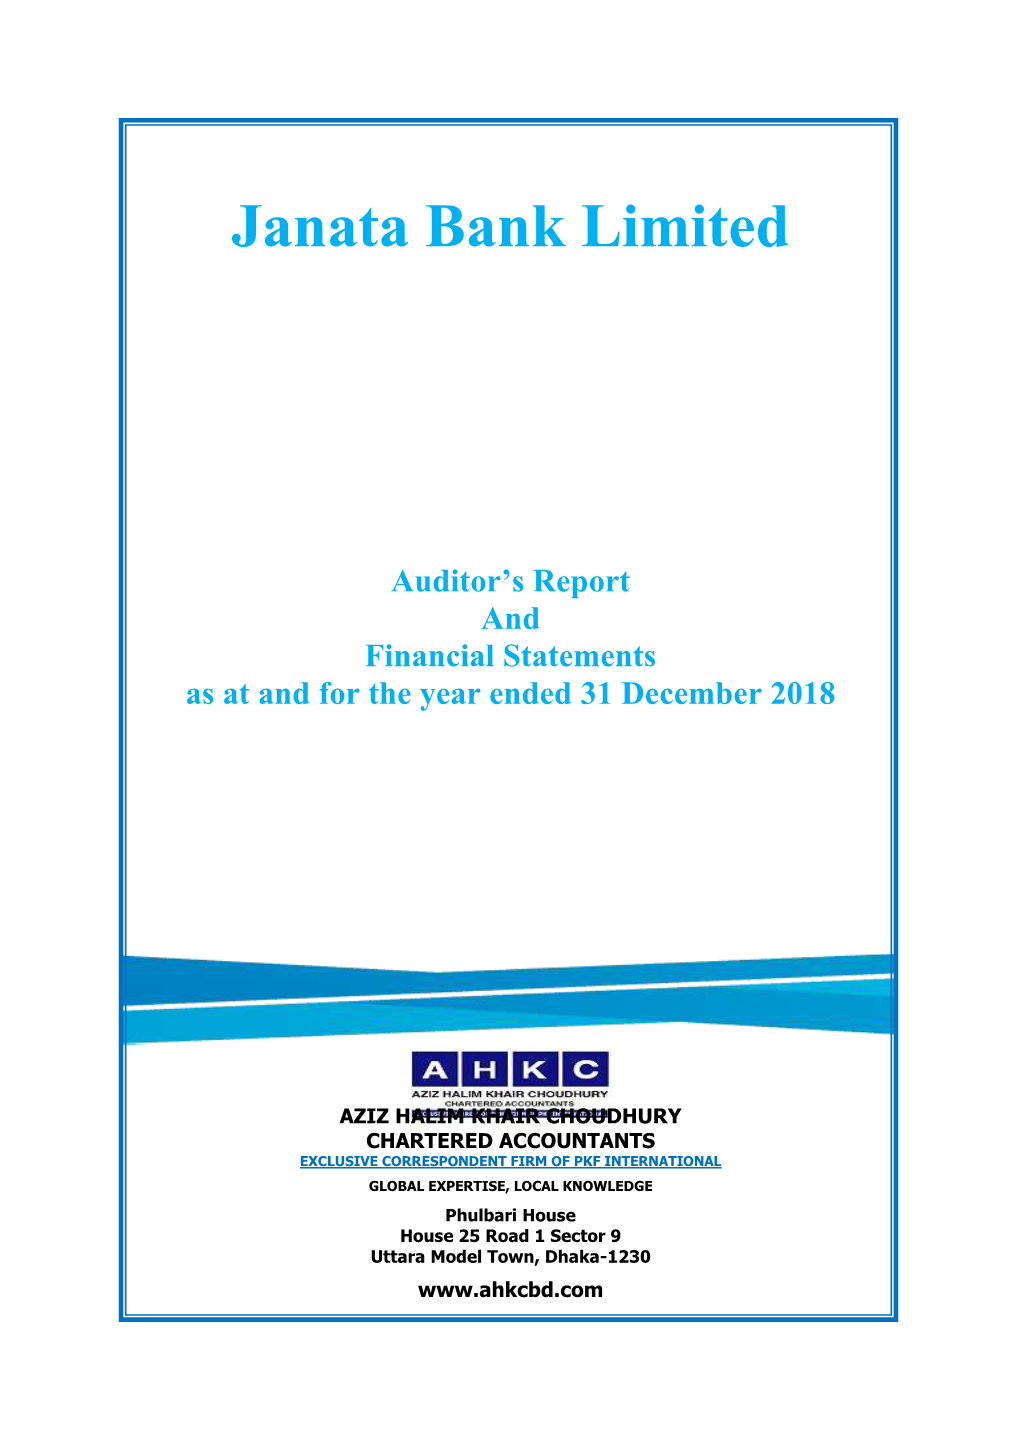 Janata Bank Limited Auditor's Report and Financial Statements As at And